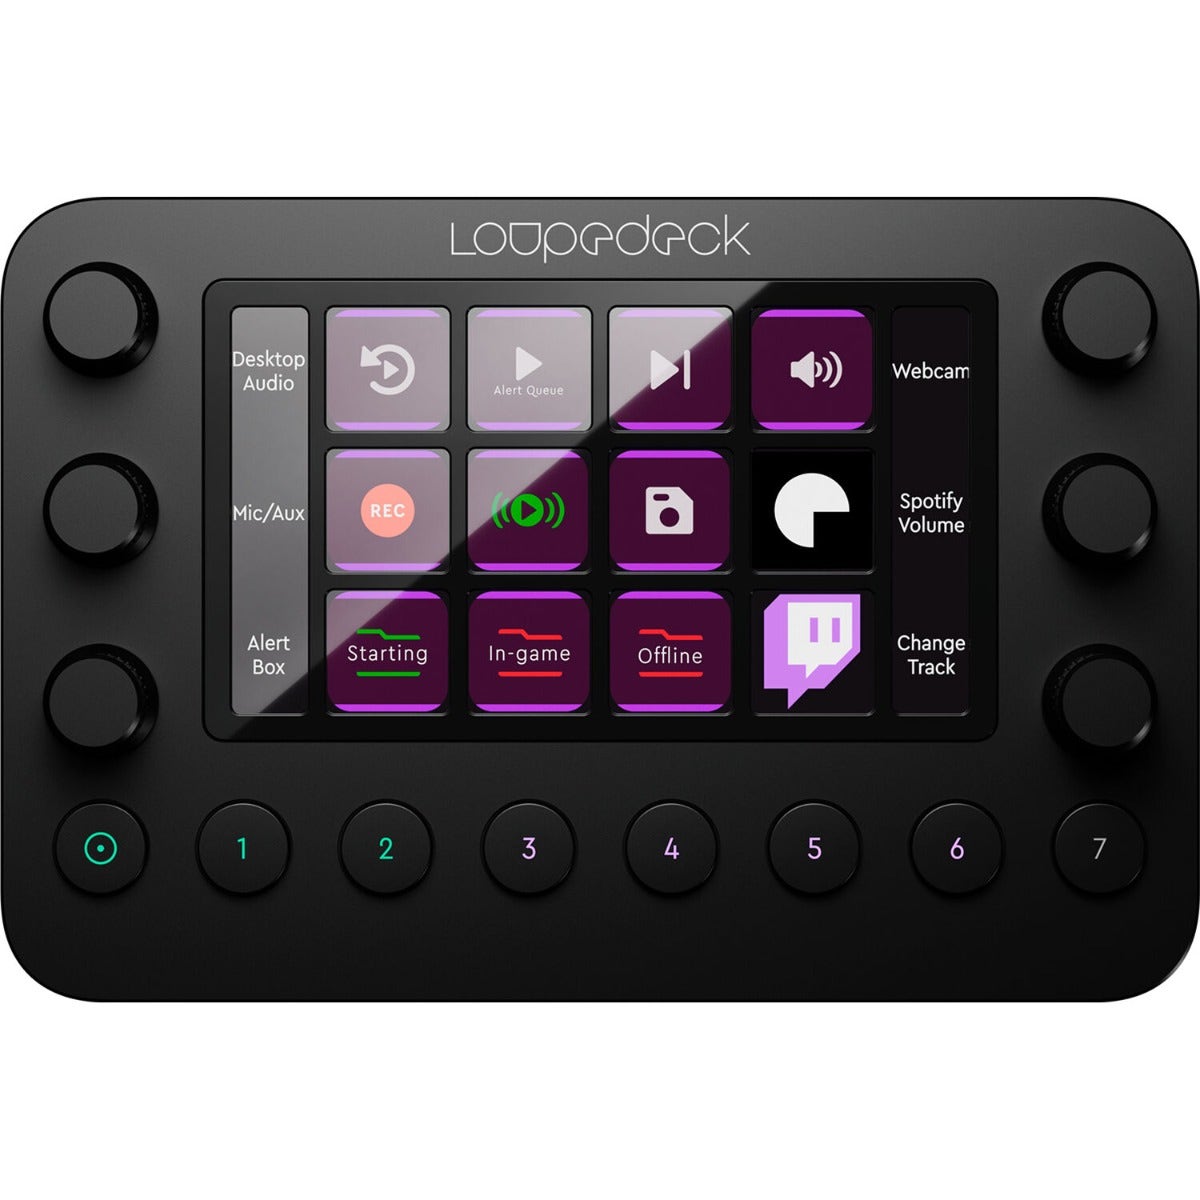 Loupedeck Live Photo/Video Editing and Streaming Console - Black